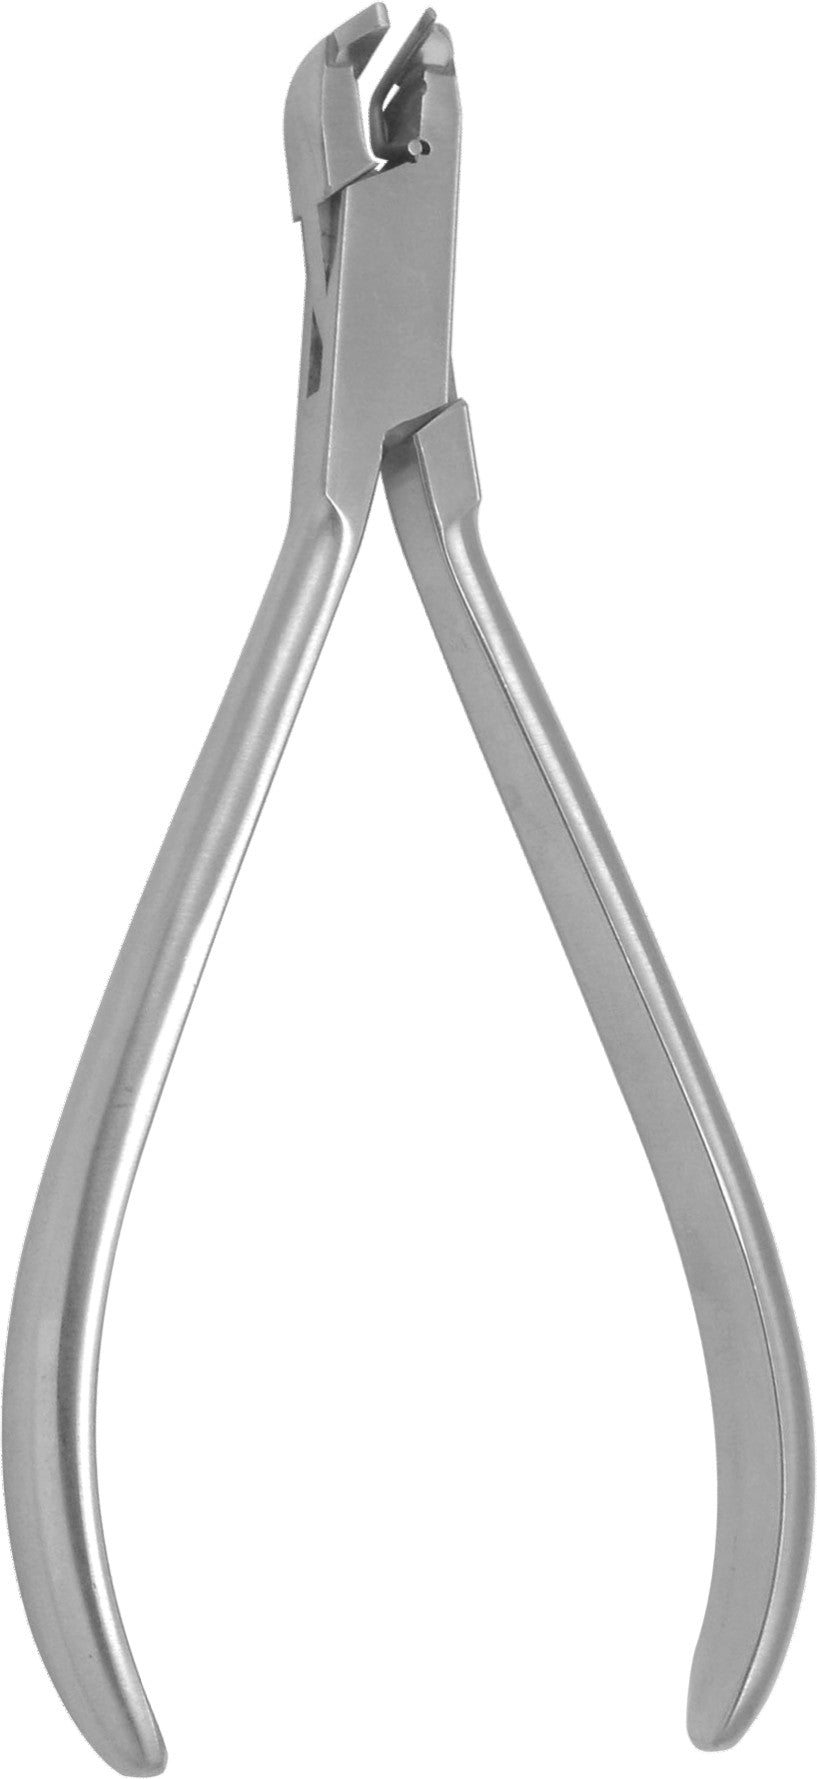 Distal End Flush Cutter with Safety Hold